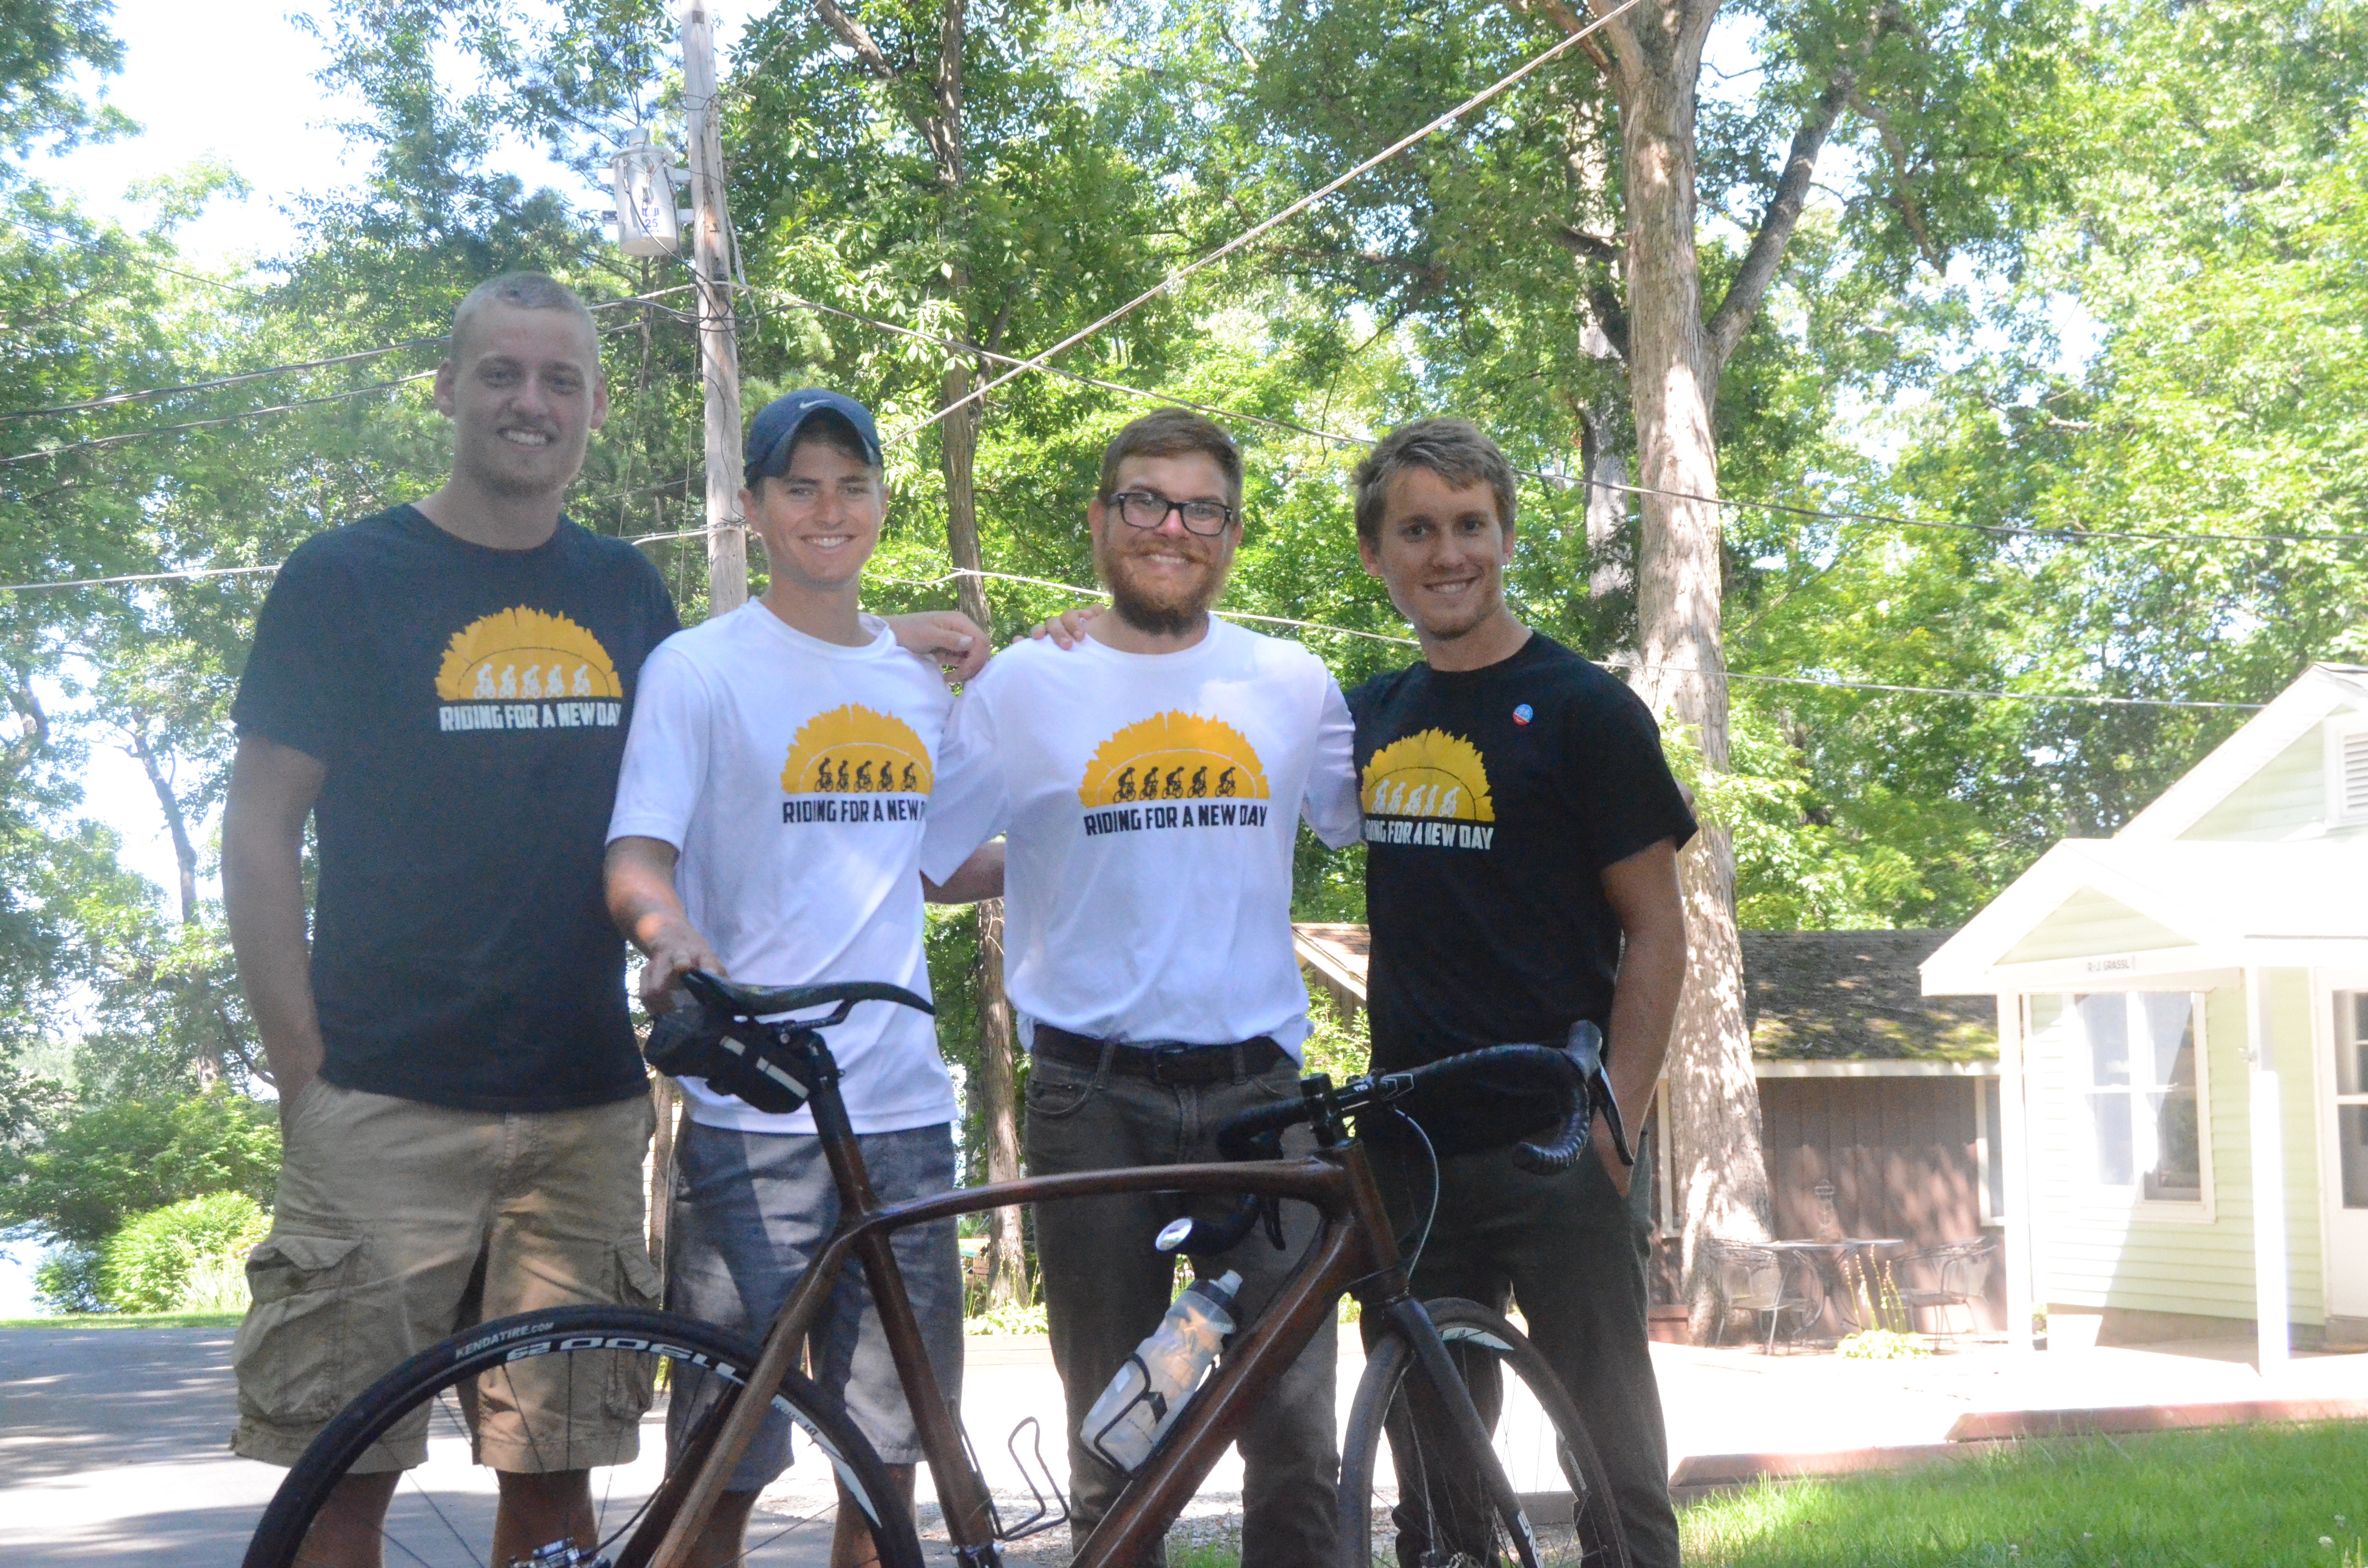 The four young men shown above are biking across country. The Cedarville University graduates, who expect to end the trip in New York state in August, are (left to right) James Blackwell, Ben Tuttle, Greg Johnson and Ryan Gustafson.